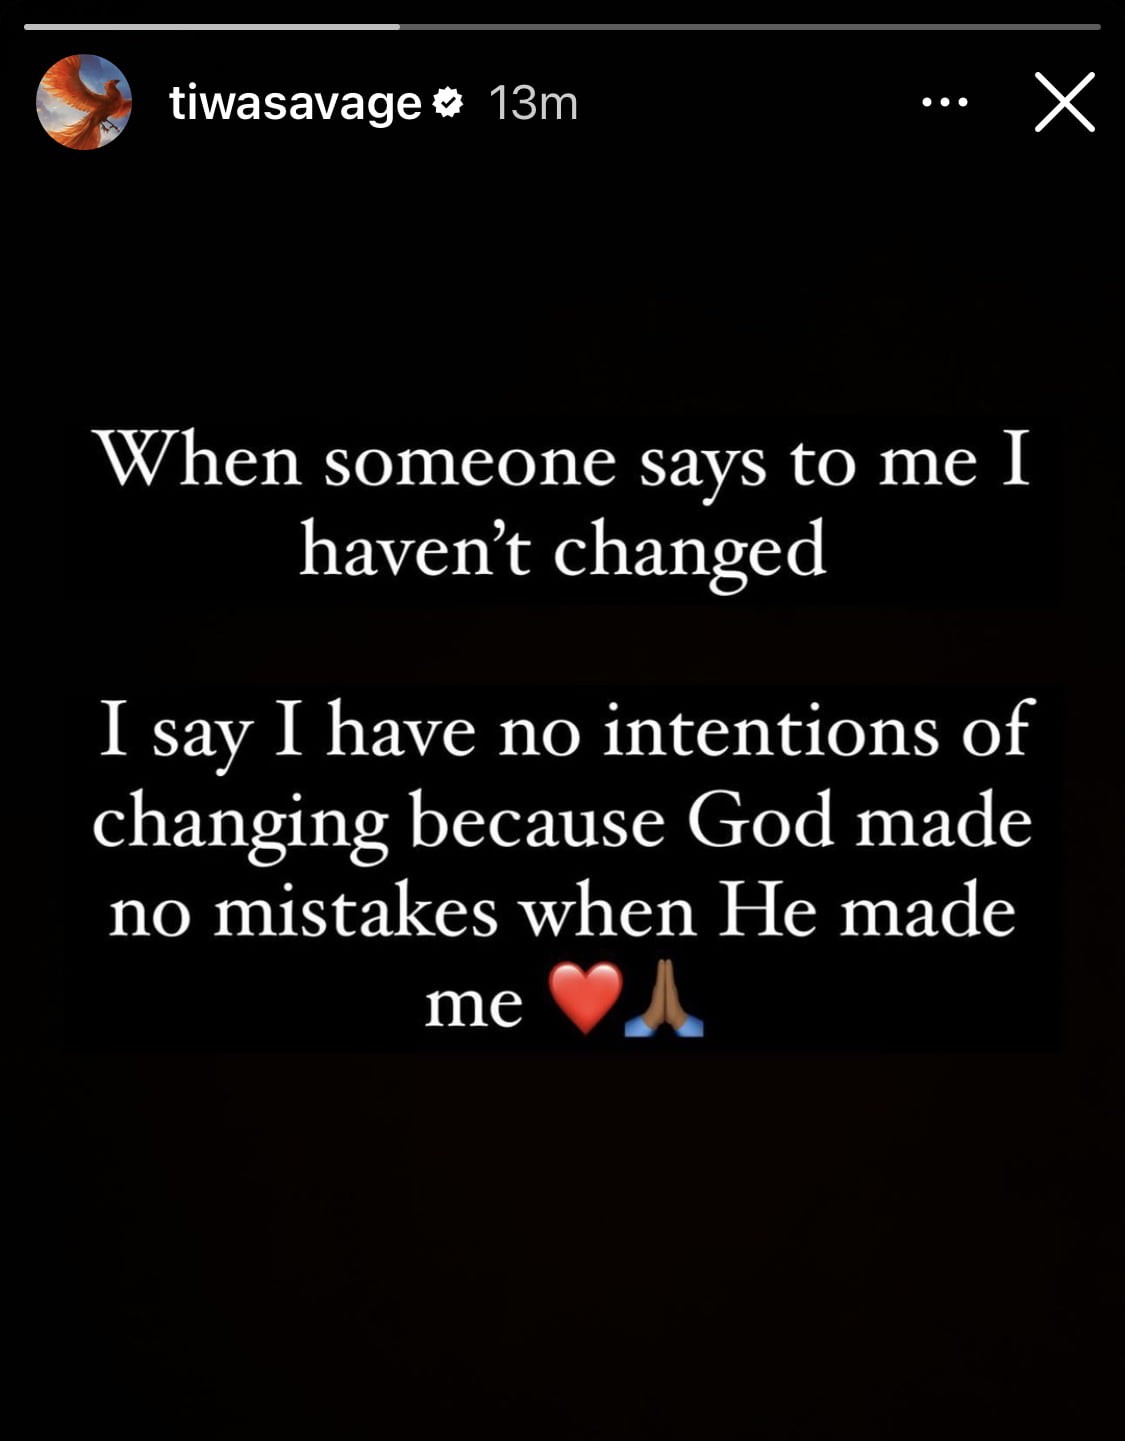 Tiwa Savage Sends Mysterious Message to Unidentified Individual - "I have no intention of changing"